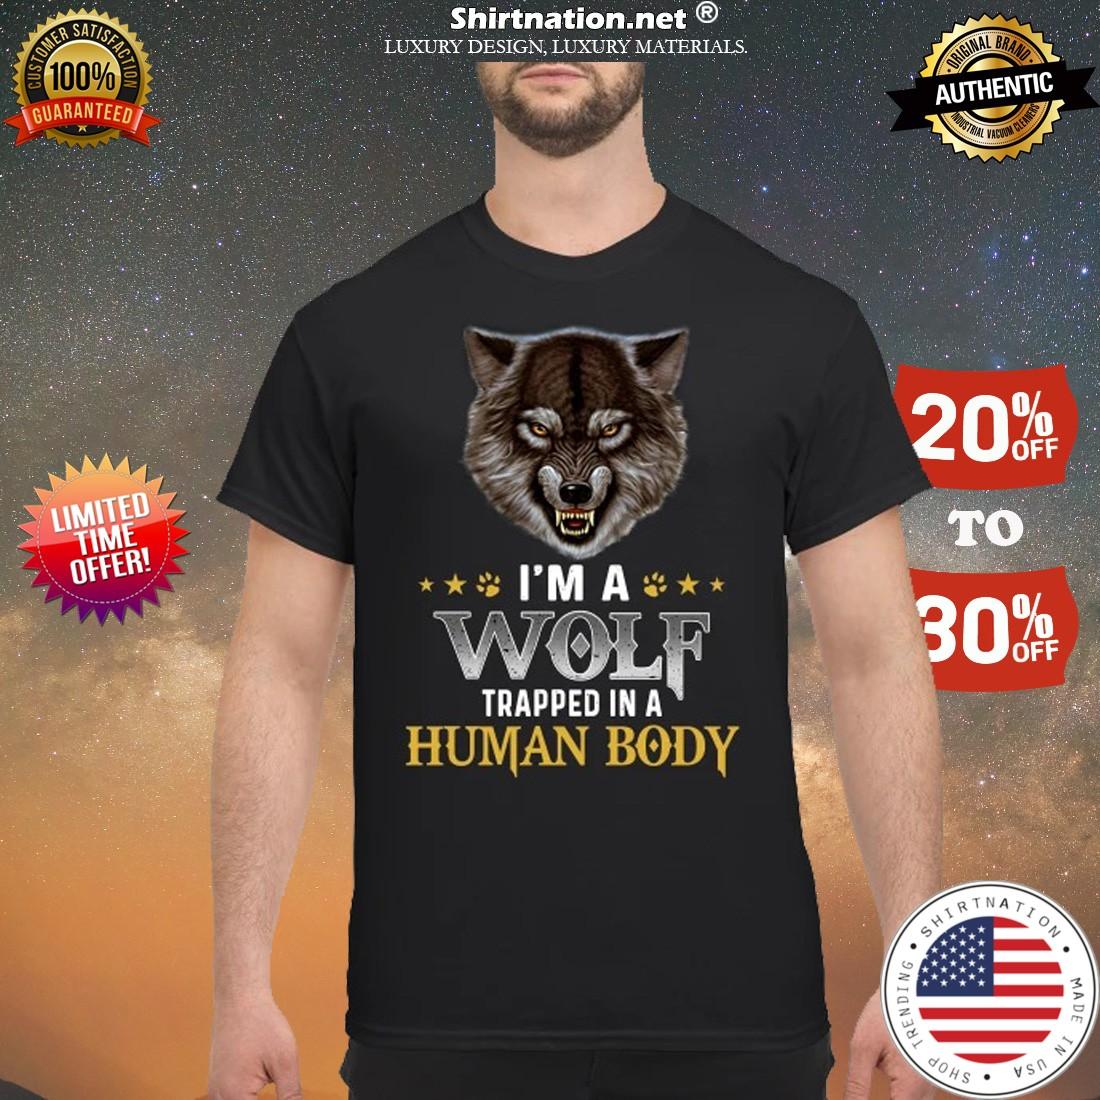 I'm a wolf trapped in a human body shirt